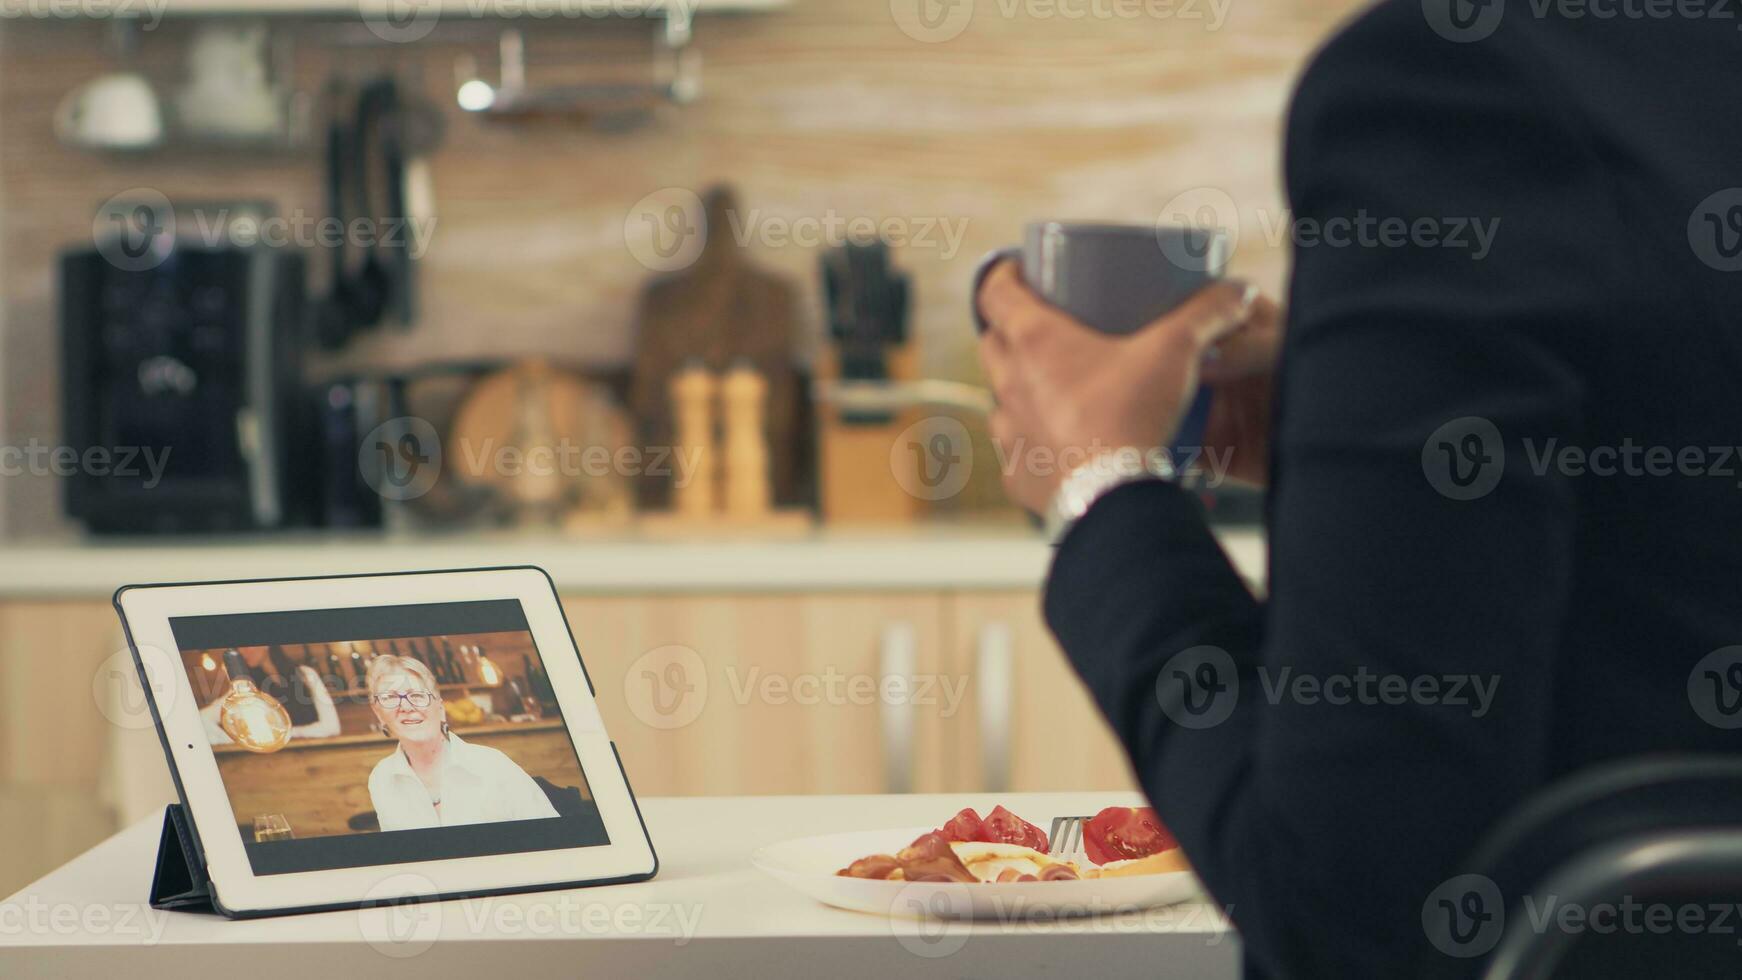 Business woman on a video call with her mother during breakfast. Using modern online internet web technology to chat via webcam videoconference app with relatives, family, friends and coworkers photo